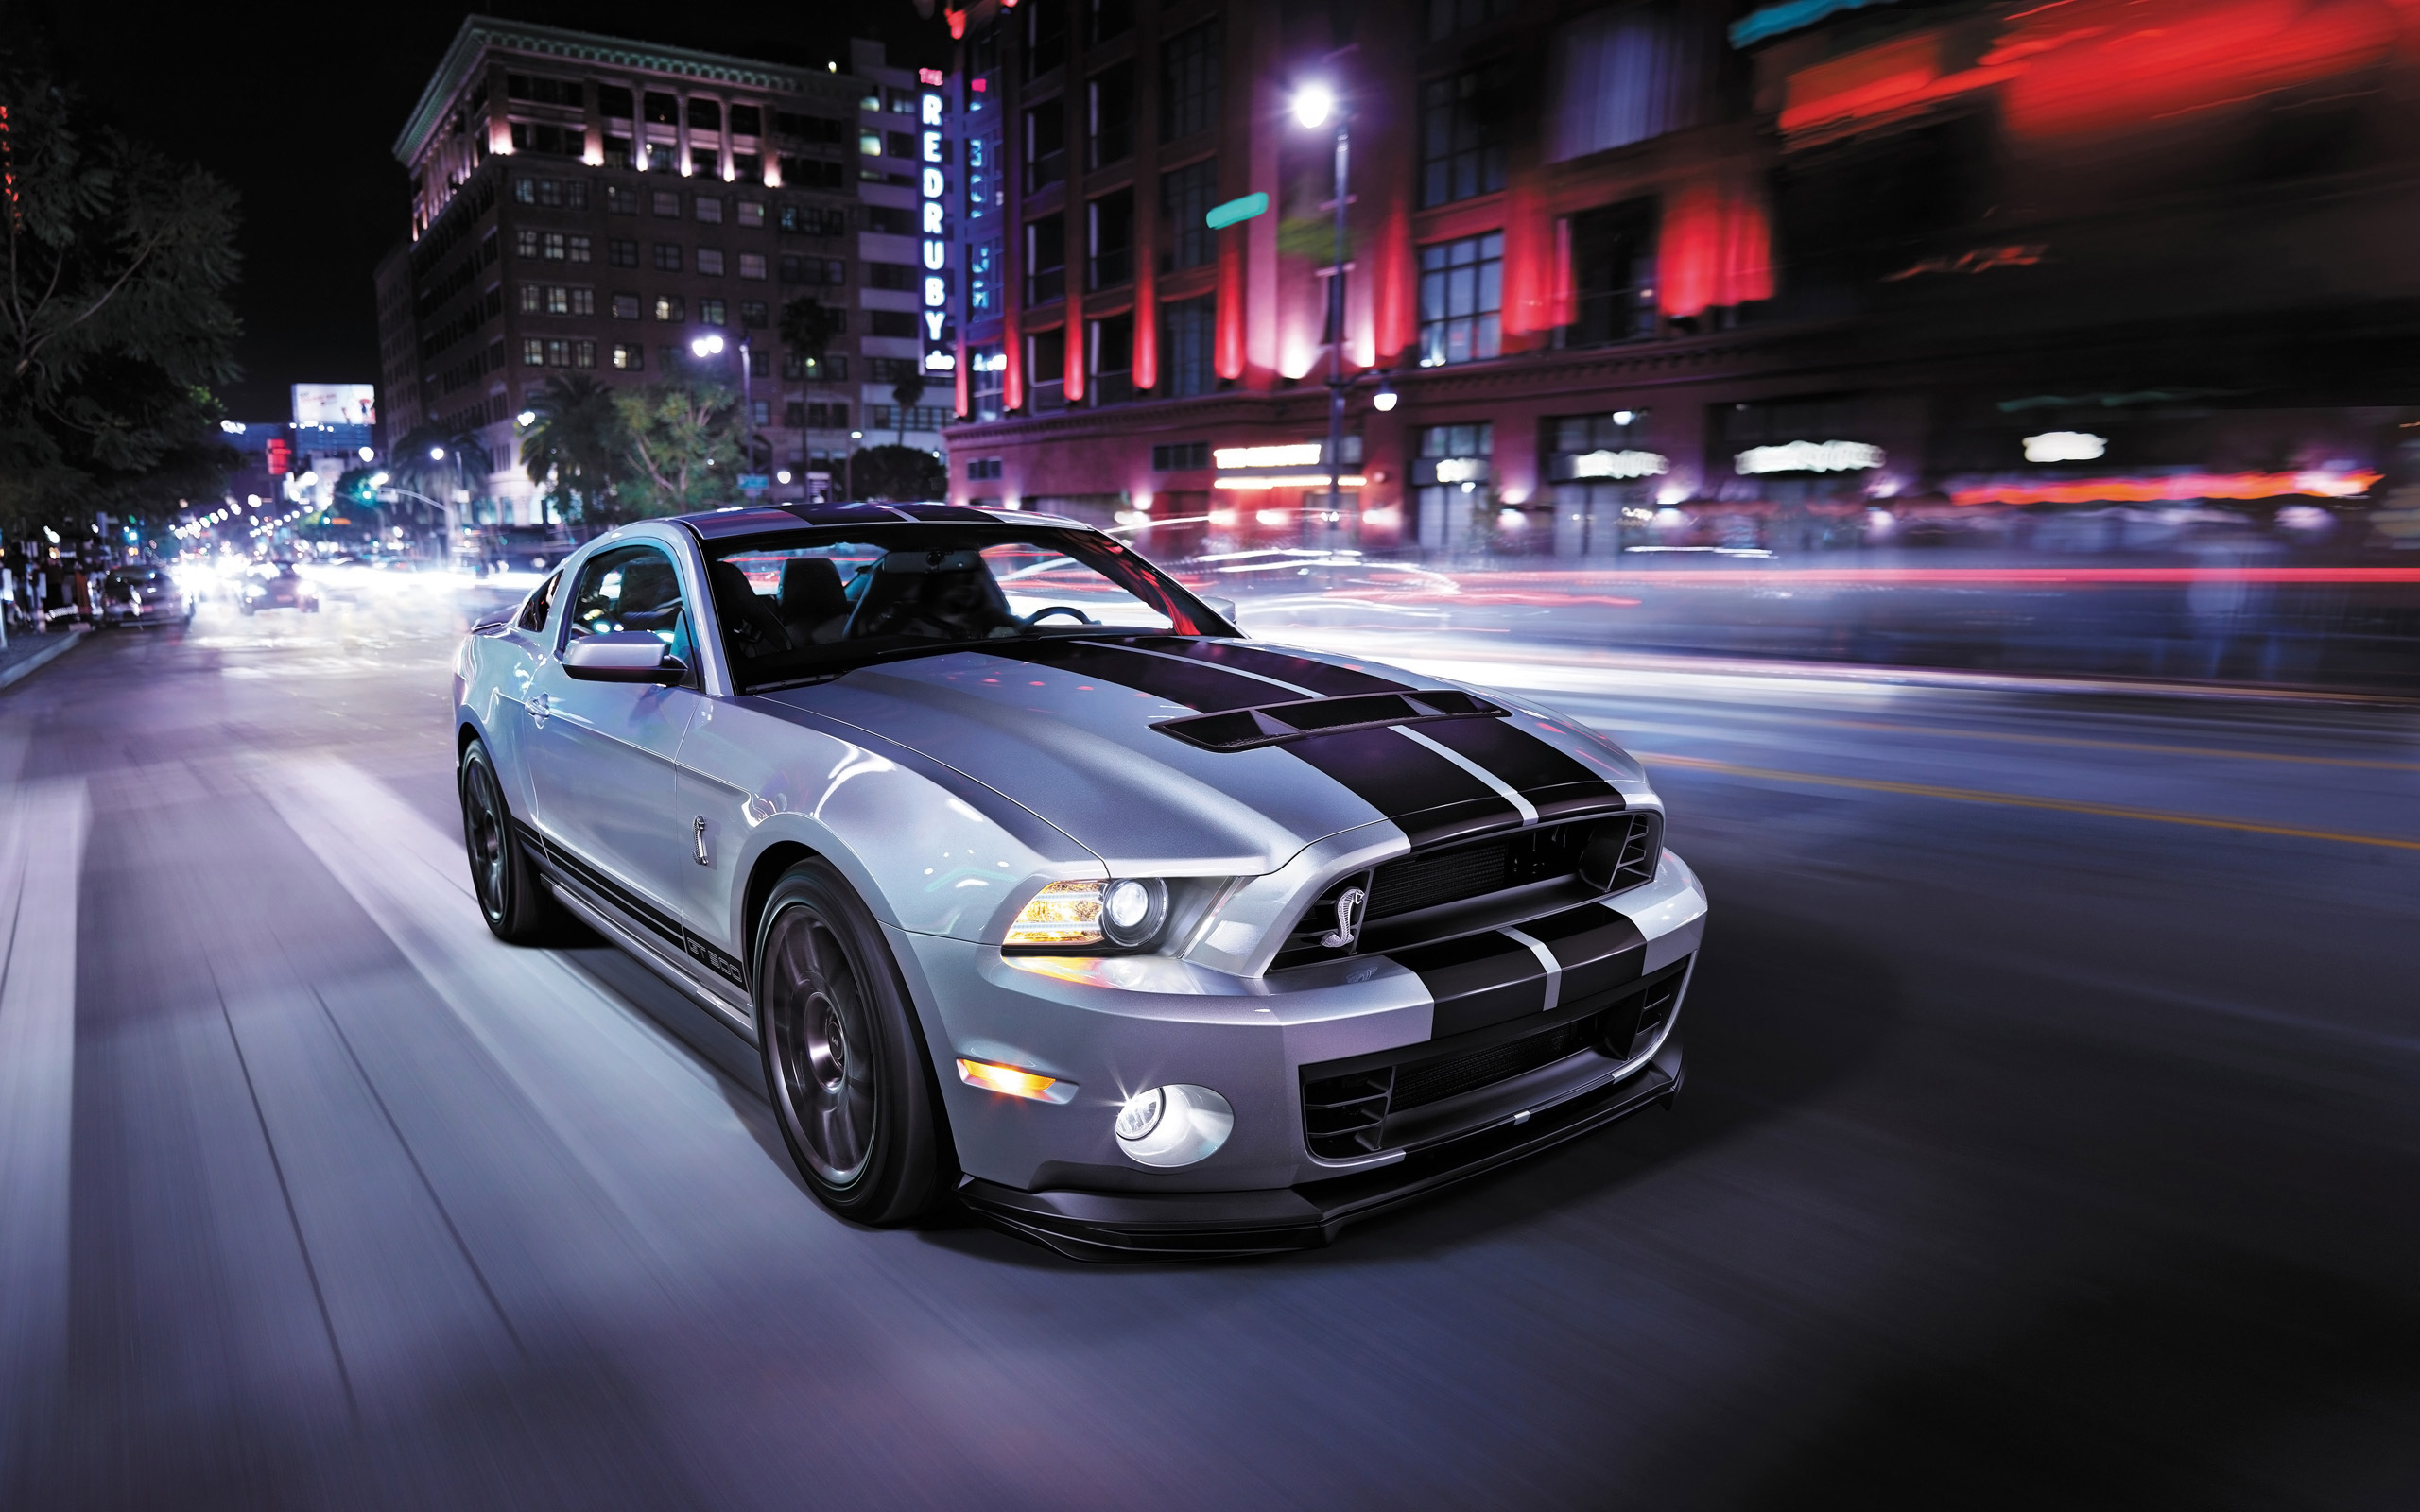 2014 Mustang Shelby Gt500 Wallpaper 2014 Ford Mustang Shelby Gt500 Hd Images And Photos Finder